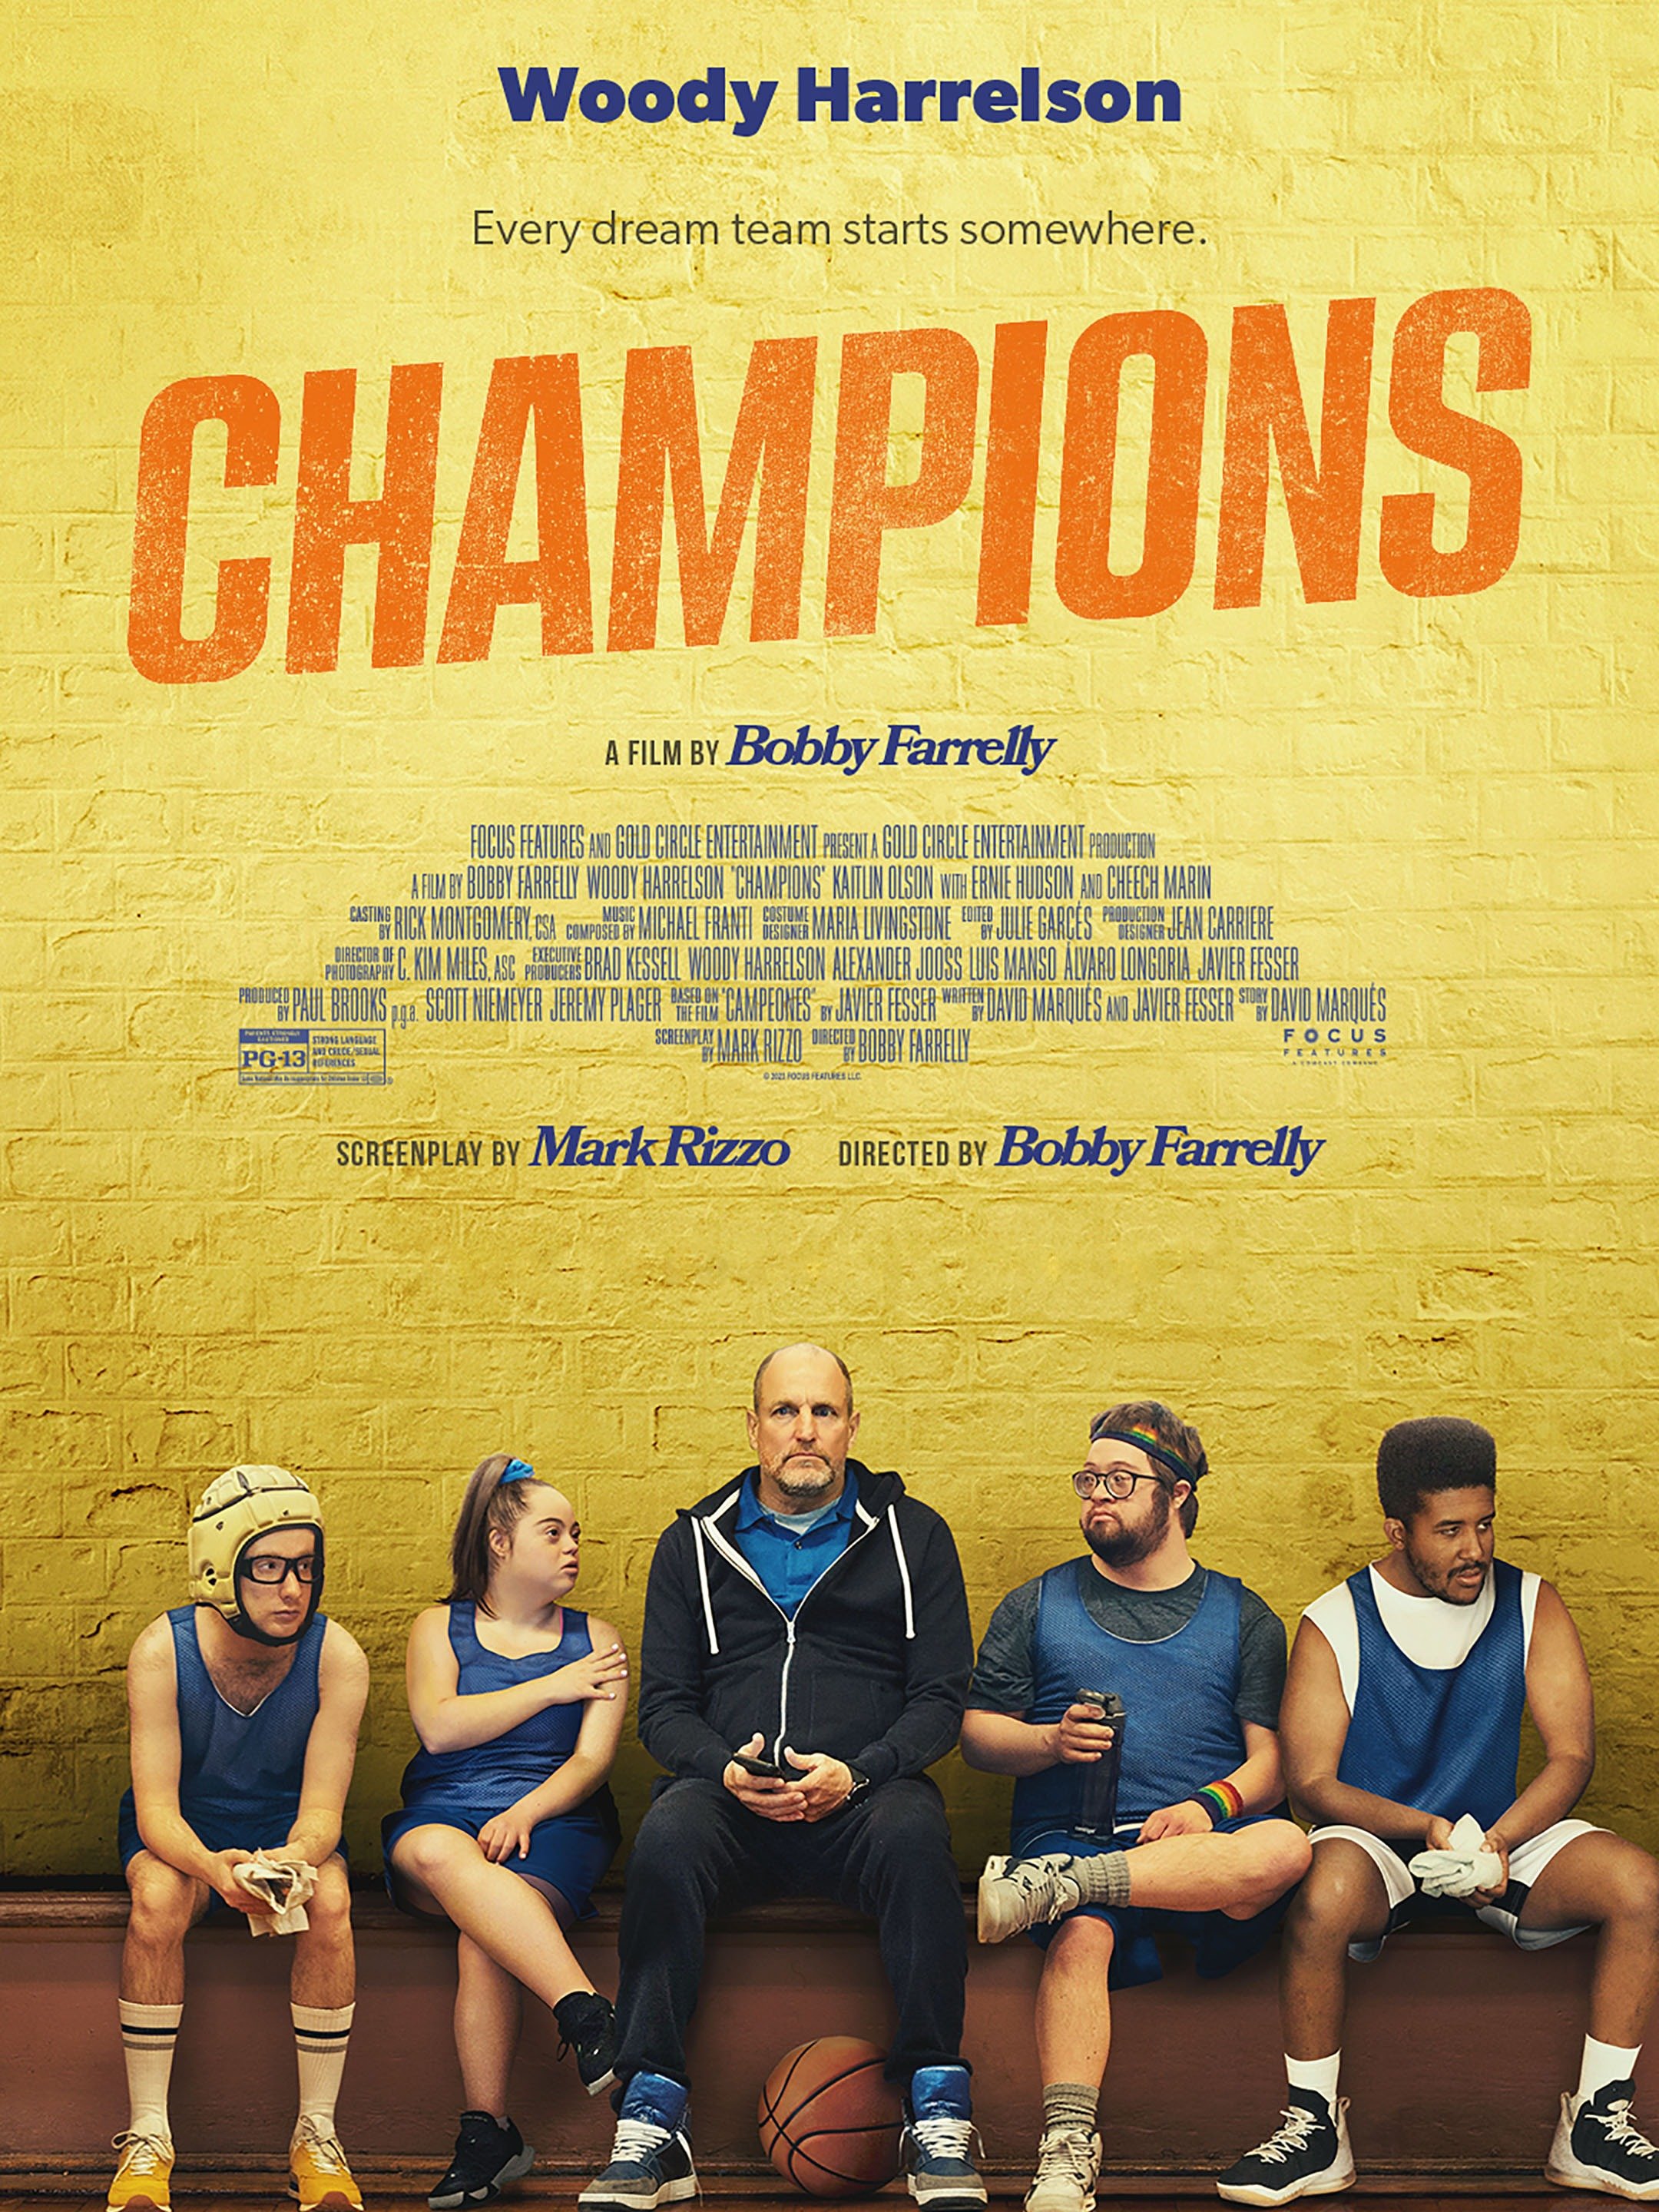 Movie poster for "Champions."